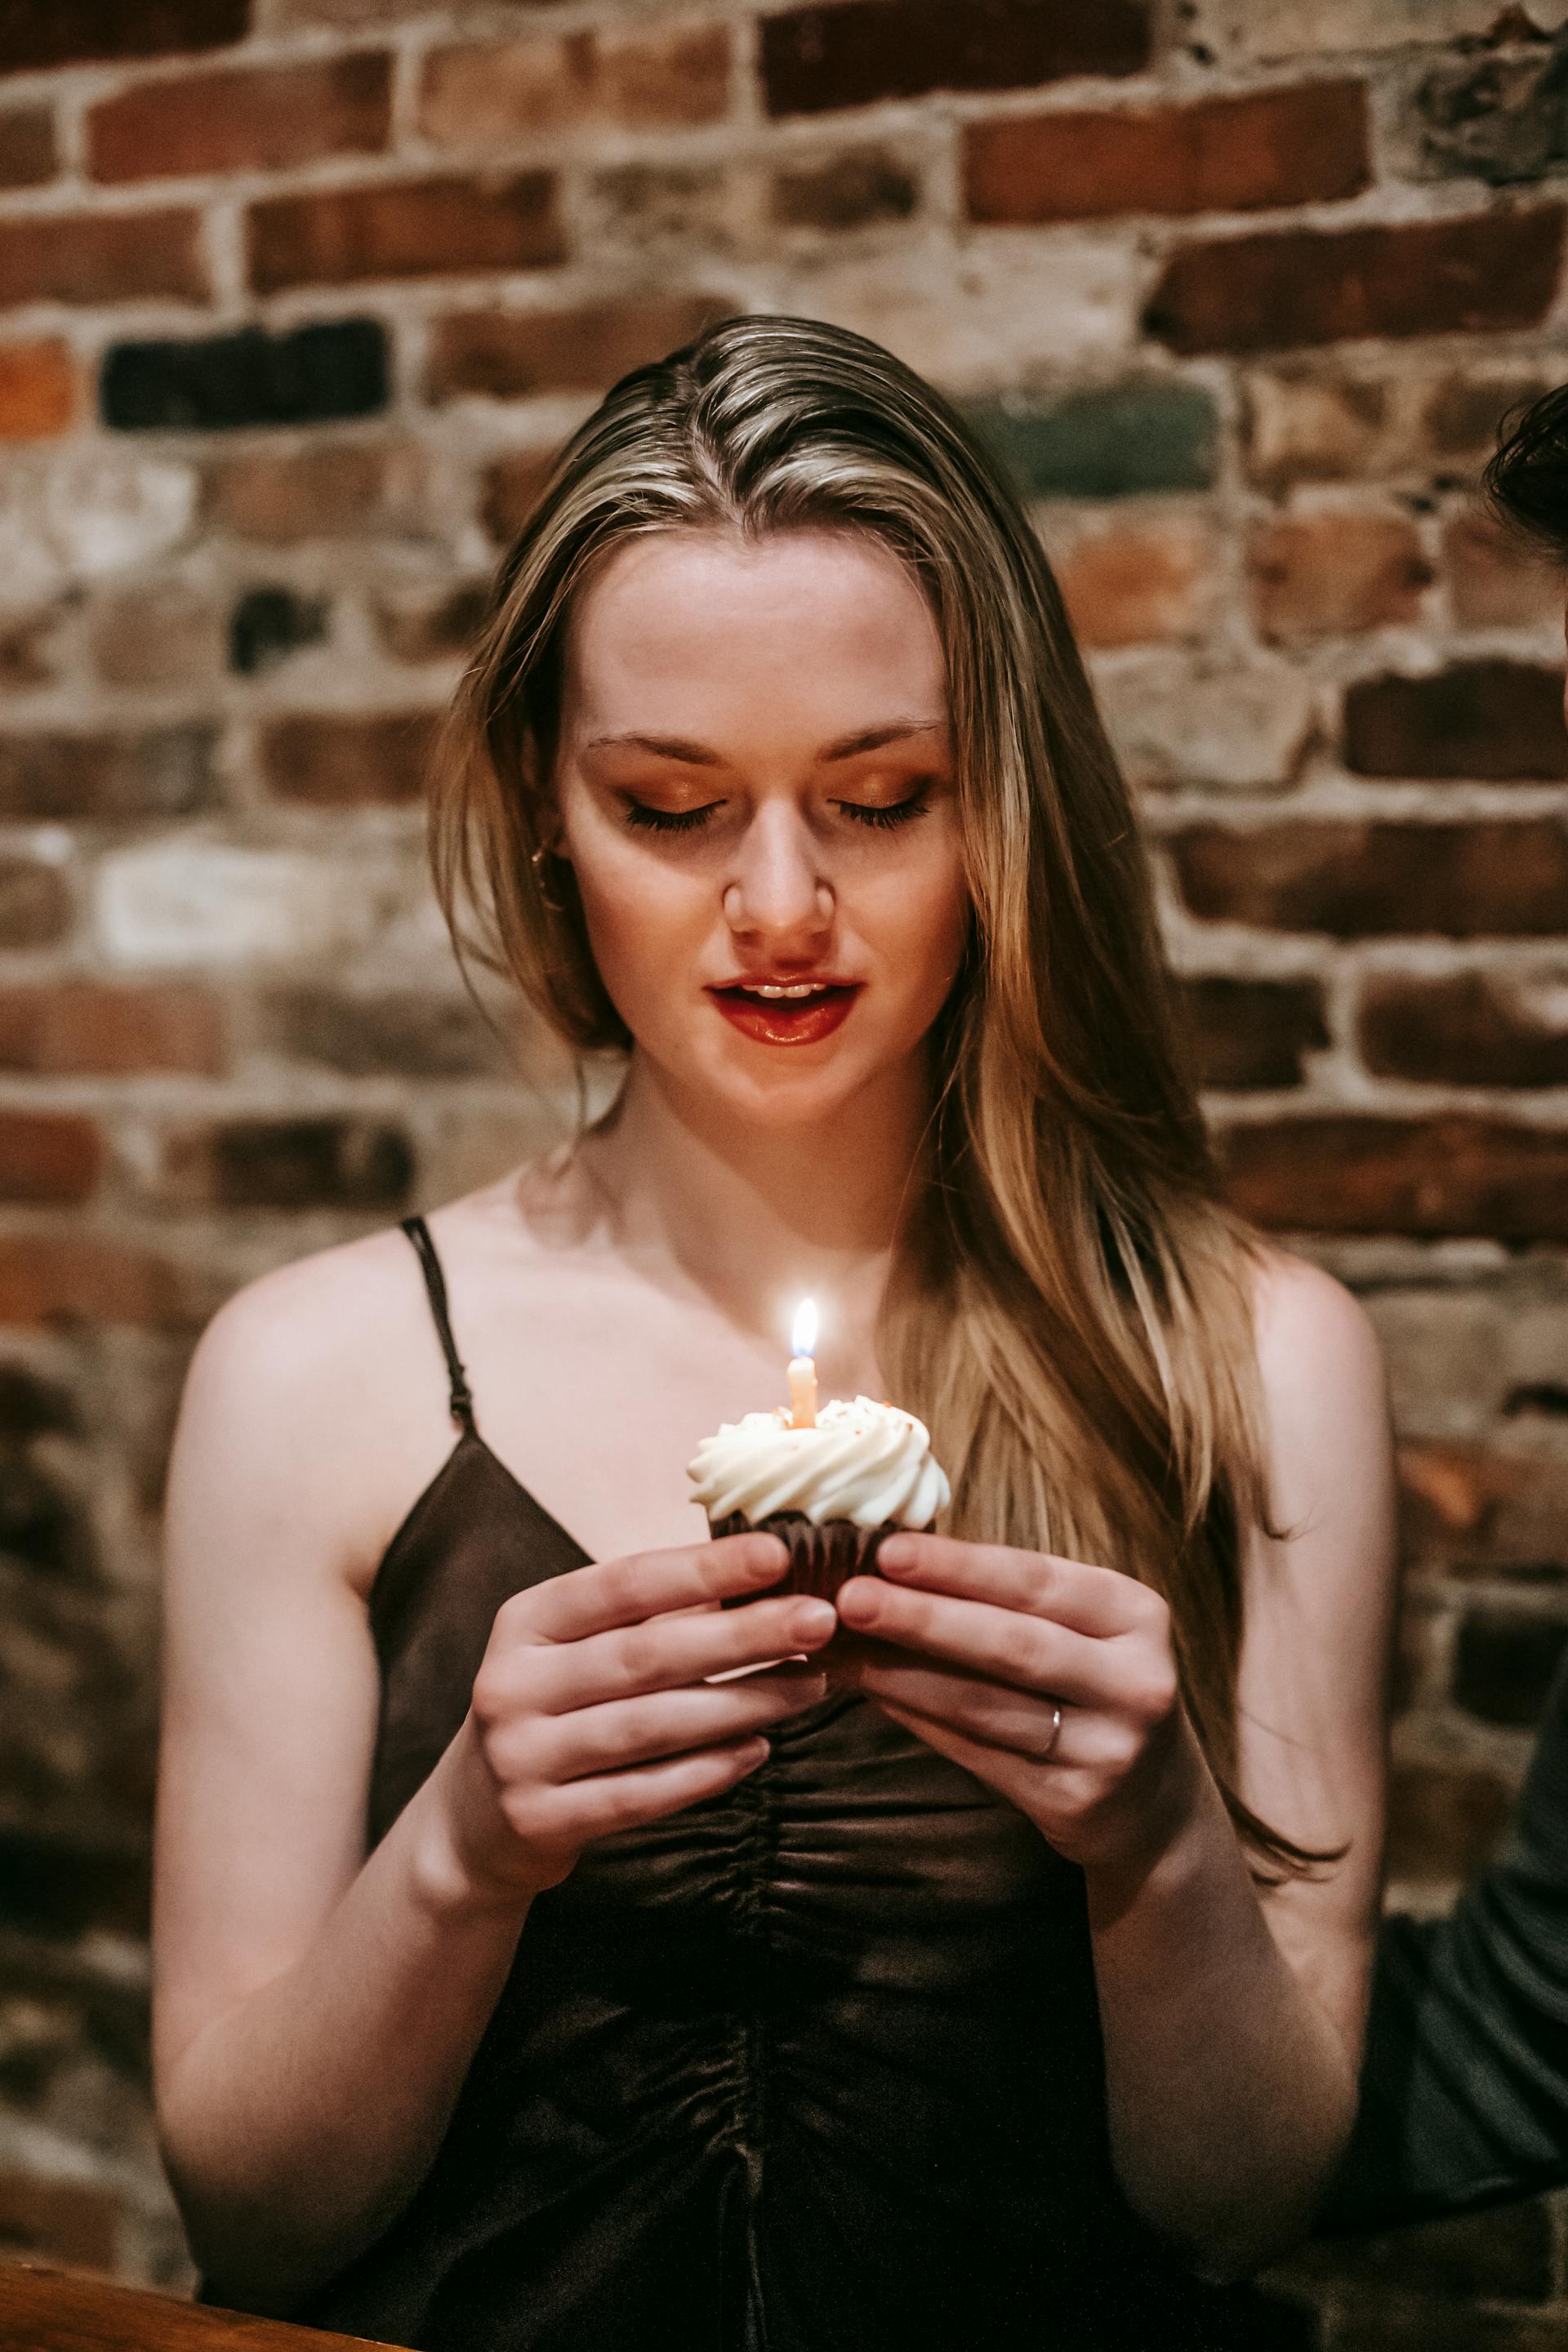 A woman holding a cupcake with a candle | Source: Pexels